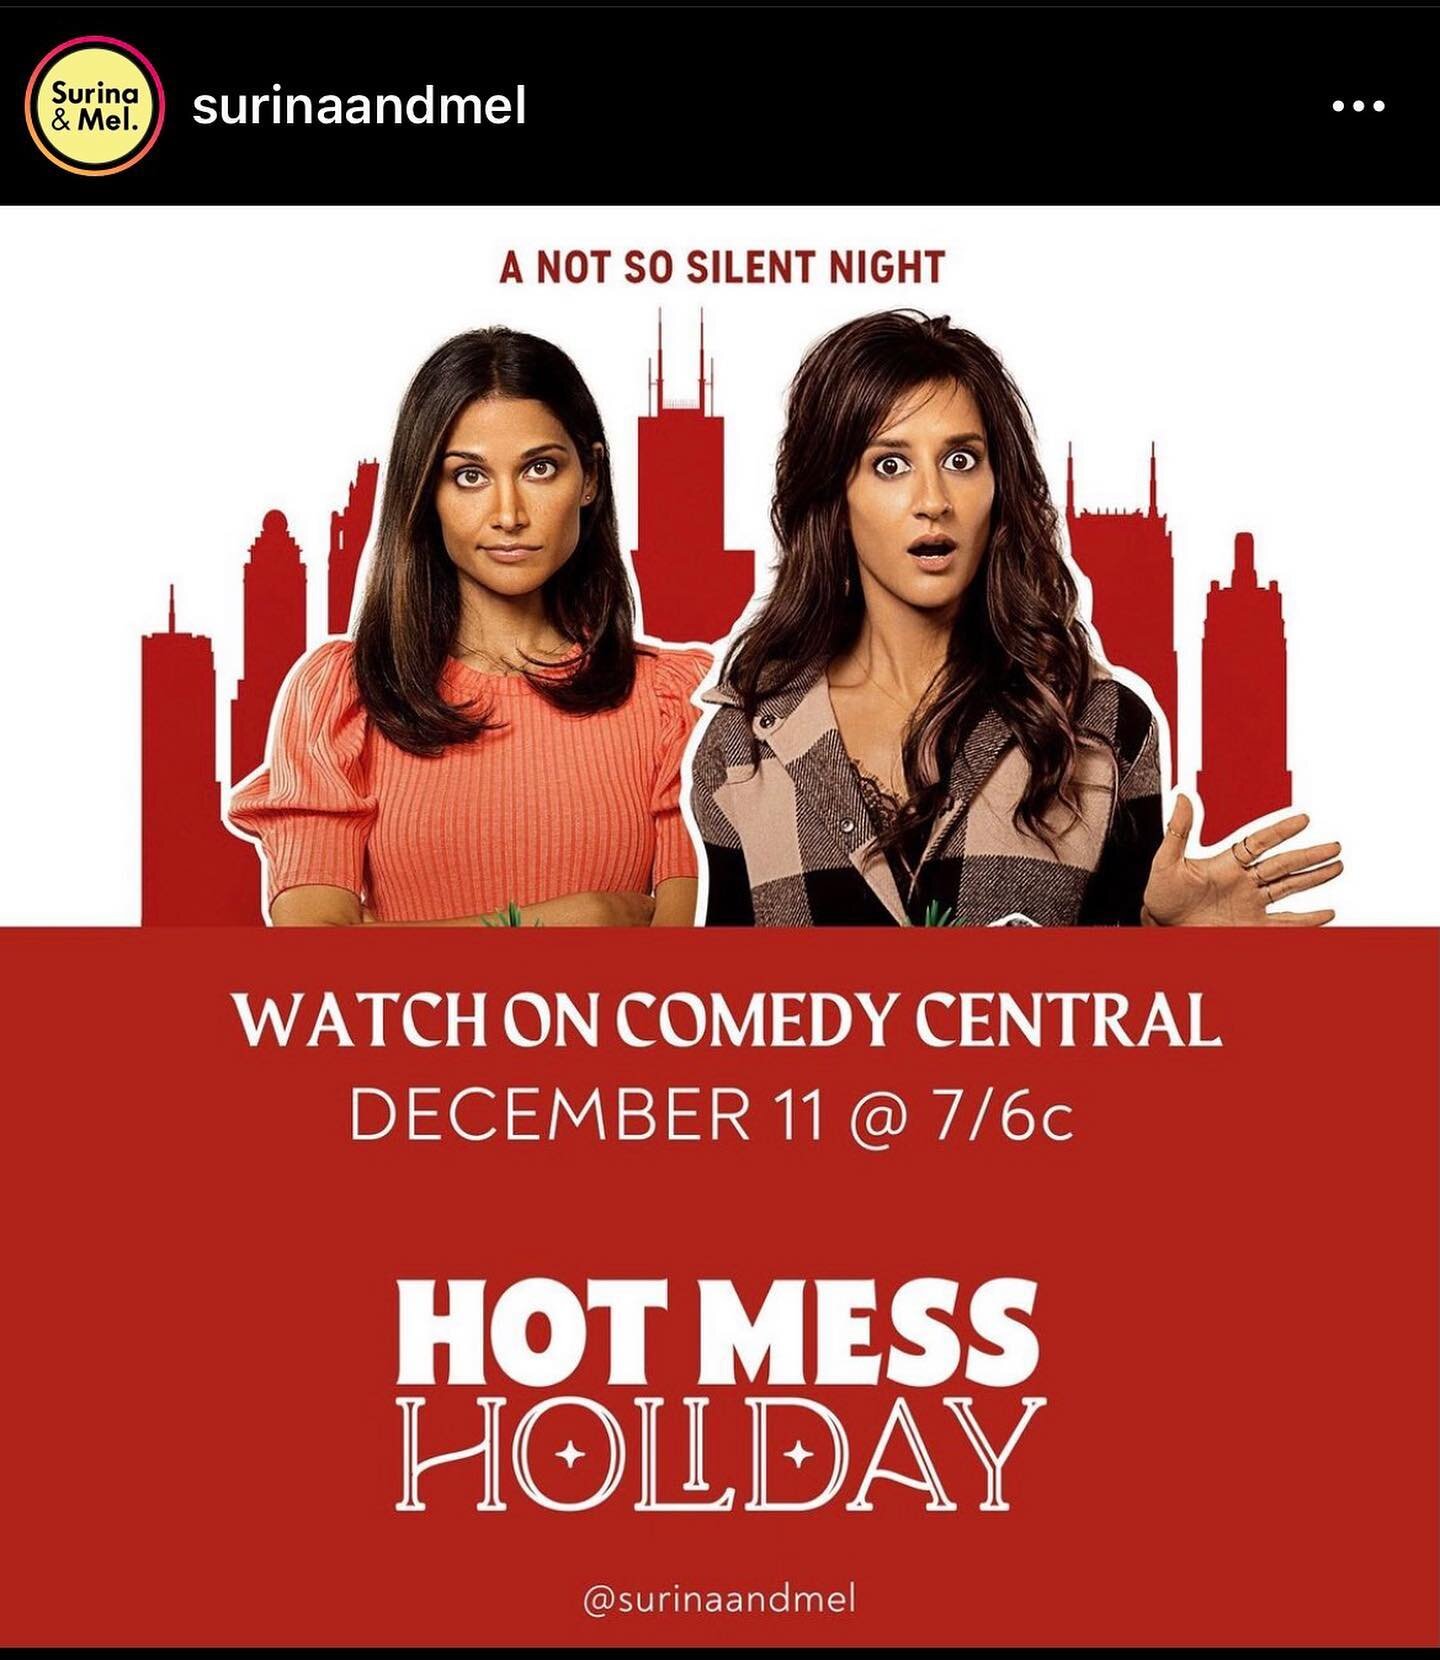 Two projects I wanna give some 💖💖💖💖 to&hellip; 

Tonight&hellip;. On @comedycentral 7/6c is #HOTMESSHOLIDAY. It is a buddy comedy with two south East ladies in the lead!!! @surinajindal and @melaniechandra @surinaandmel you are killing it!!!

The